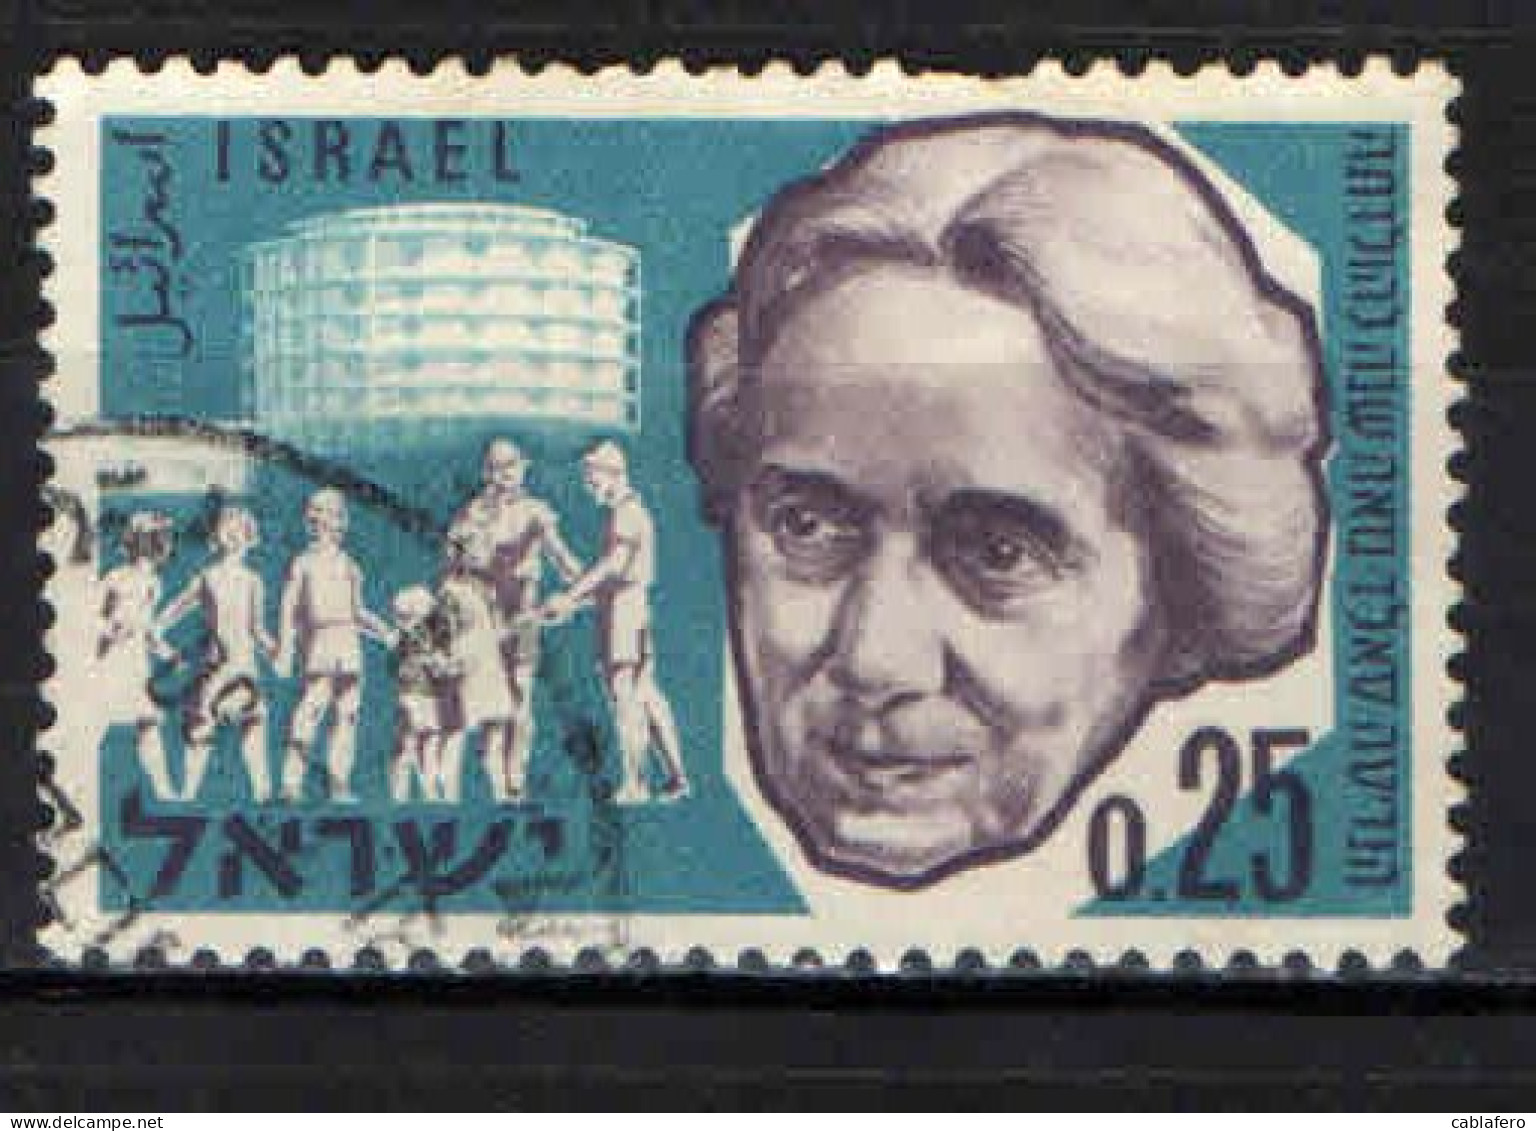 ISRAELE - 1960 - Birth Cent. Of Henrietta Szold, Founder Of Hadassah, American Jewish Women’s Organization - USATO - Used Stamps (without Tabs)